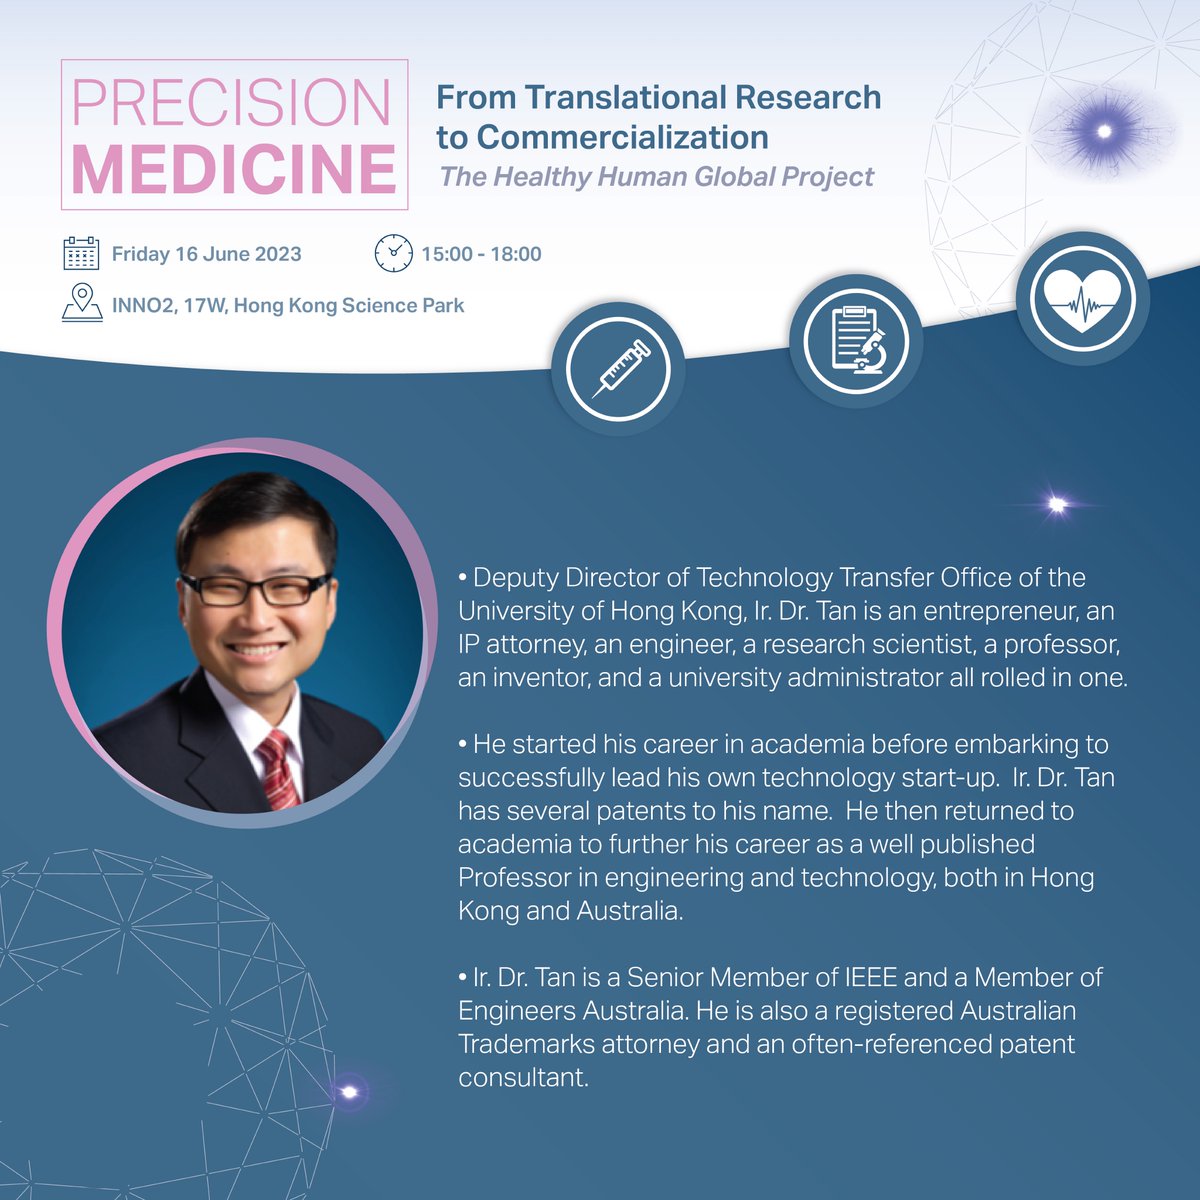 [Seminar] Let’s introduce today Ir. Dr. Alfred Tan, Deputy Director @HKUniversity Technology Transfer Office!

Dr. Tan will be discussing #TranslationalResearch and Commercial Development for #PublicHealth with us.

tinyurl.com/c3bccwhd